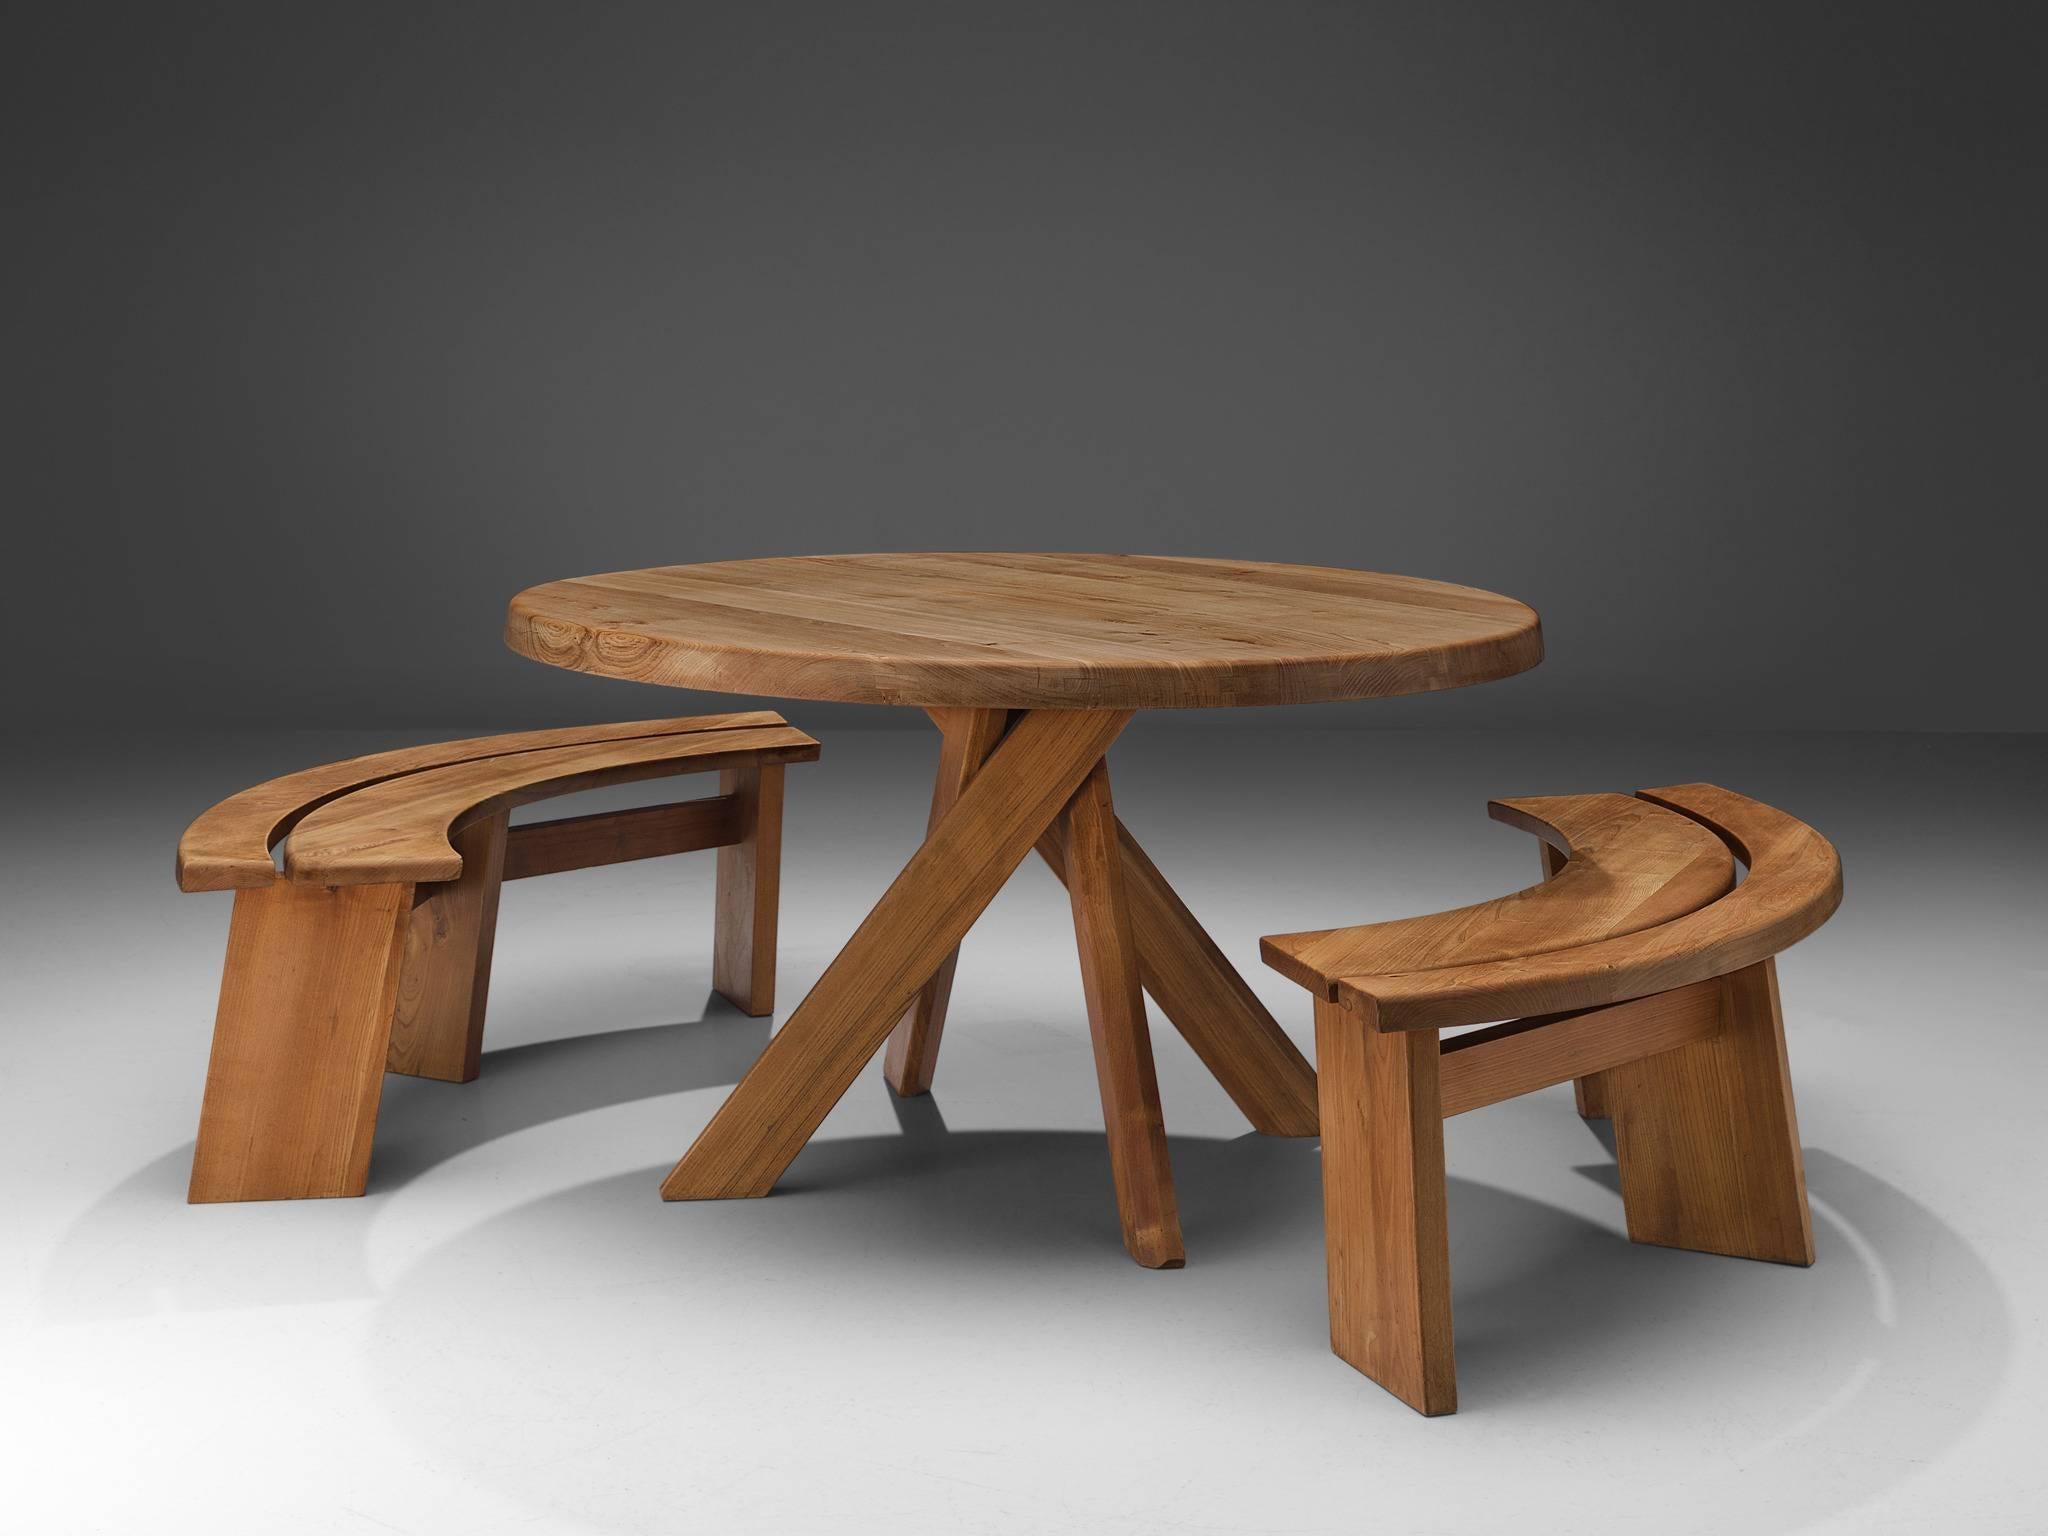 Pierre Chapo, Dining set with round pedestal table and two benches, models T21C and S38A, solid elmwood, France, 1960s.

Very well crafted round pedestal T21C table and 2 quarter round S38A benches, all in good condition. The basic design and